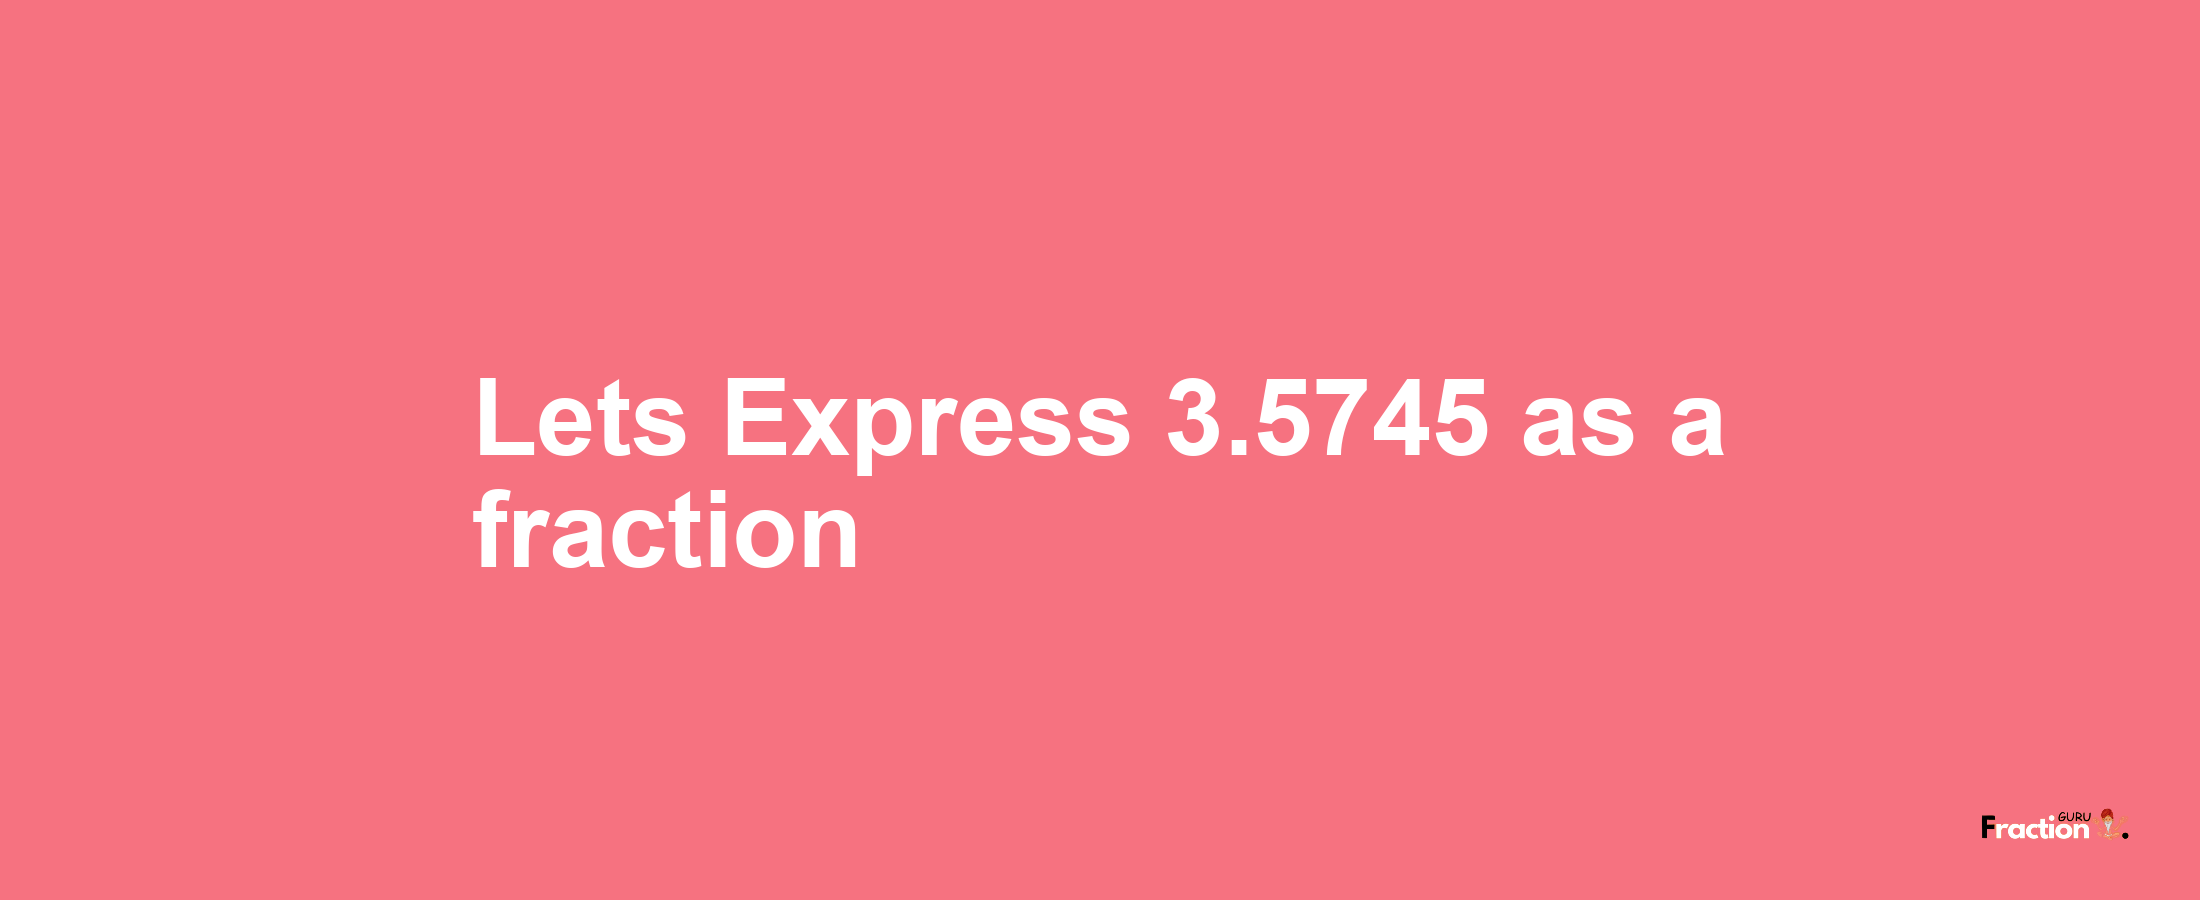 Lets Express 3.5745 as afraction